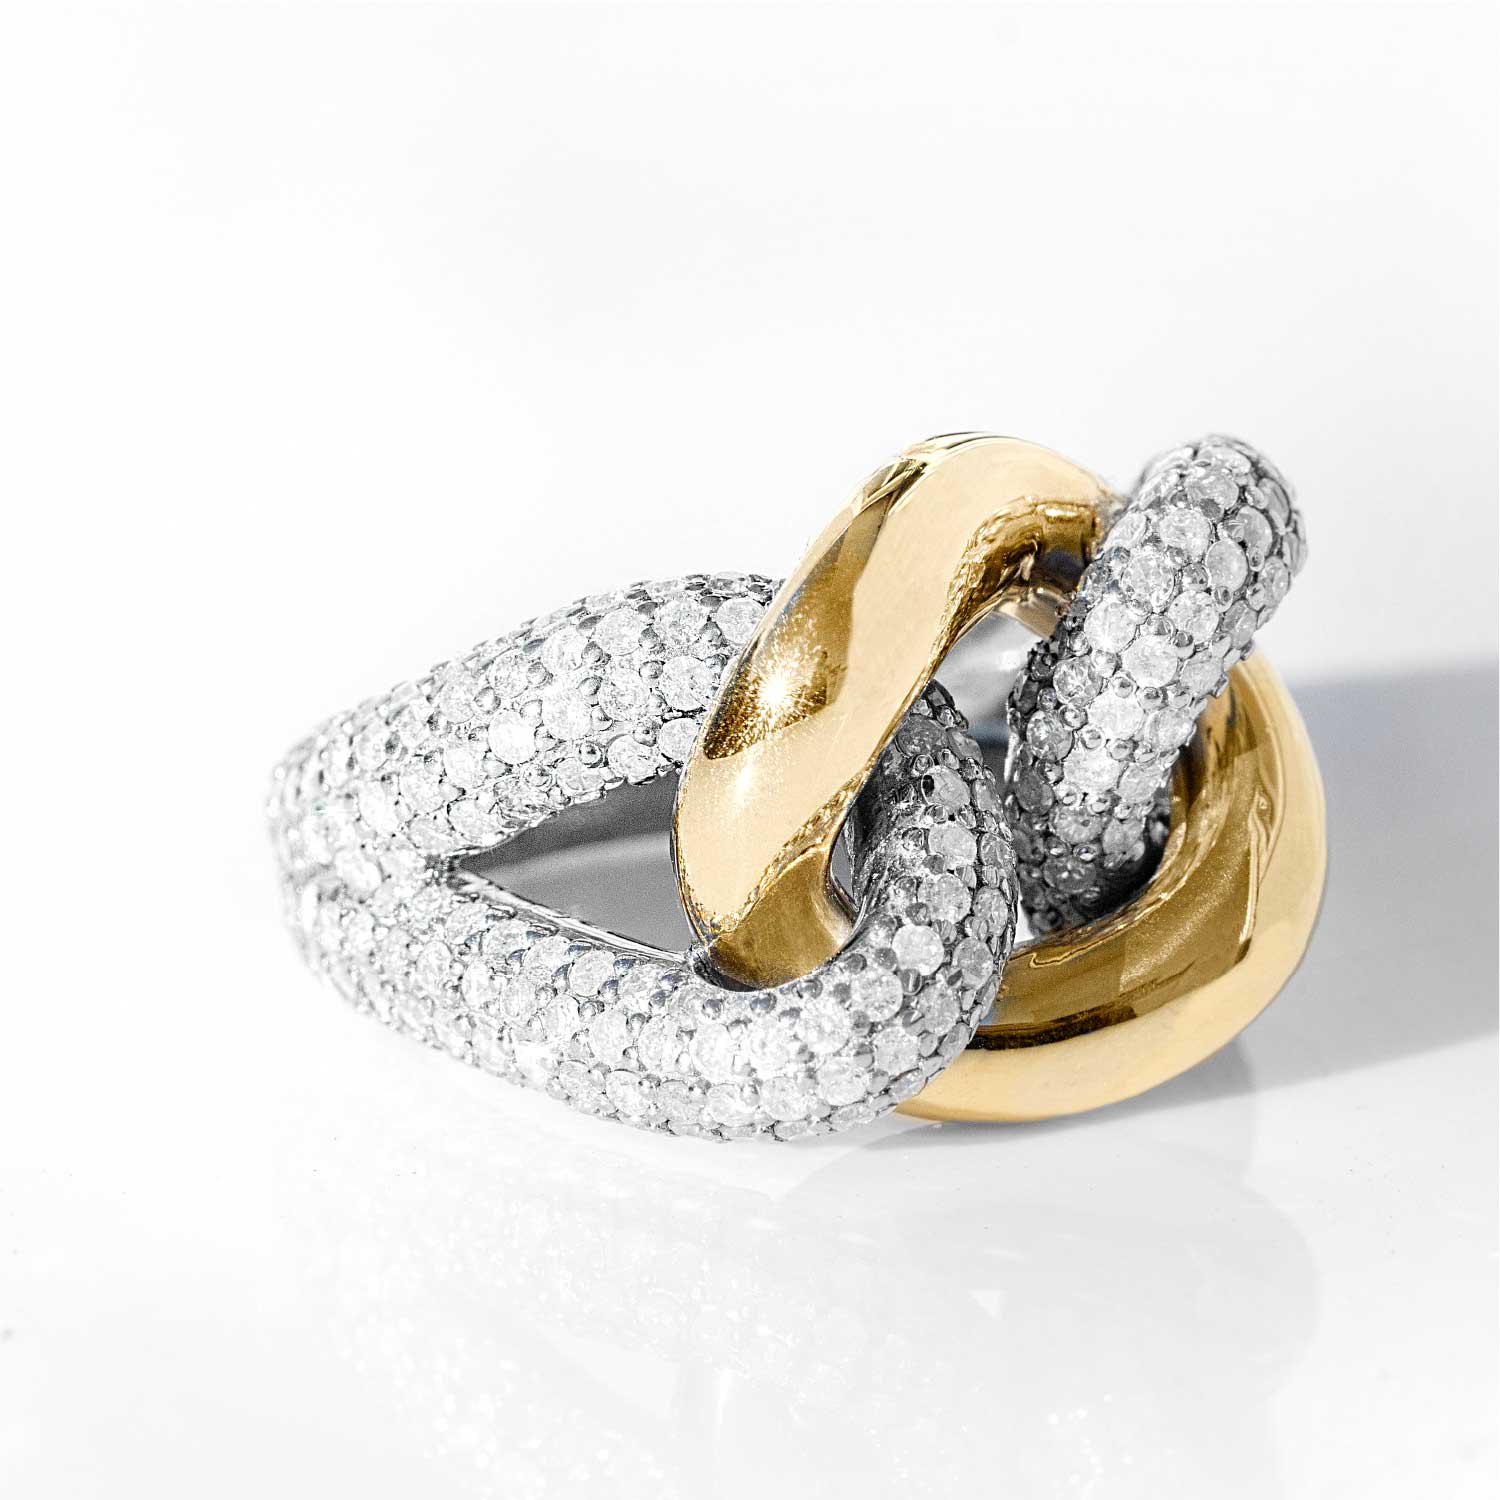 14k Gold and Sterling Silver Diamond Love Knot Ring from the Women's Ring Collection.